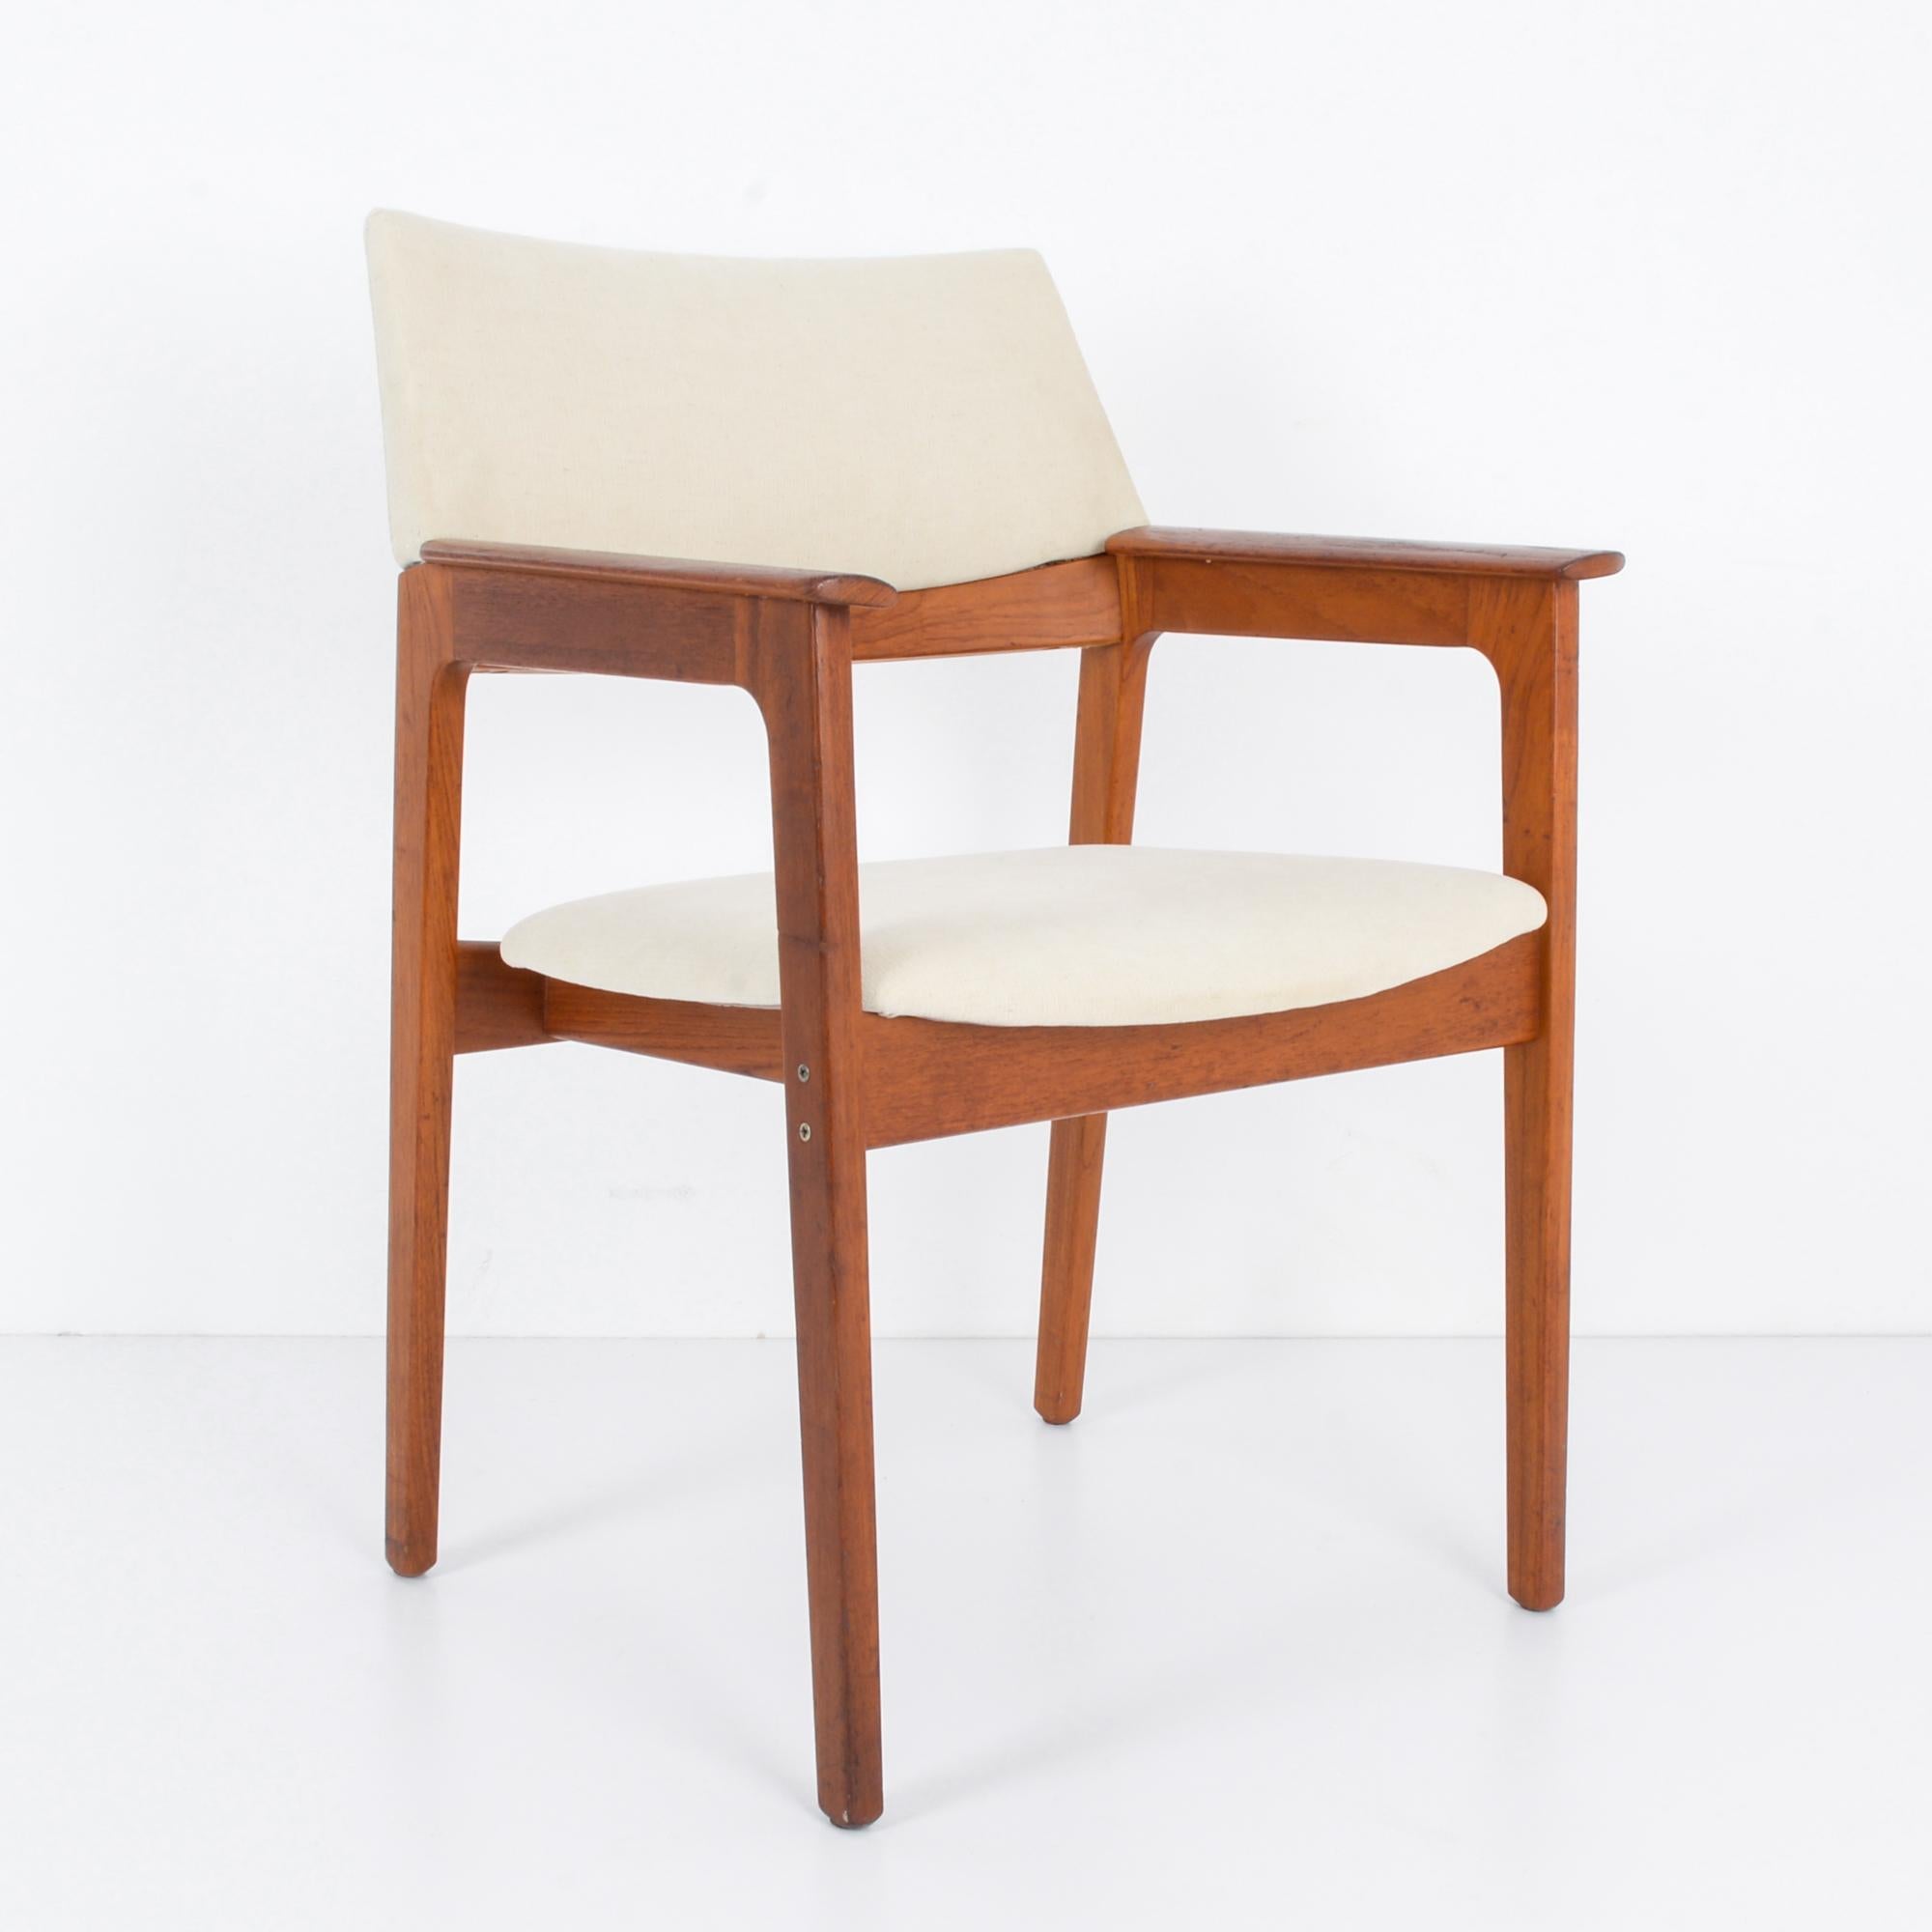 In the innovative design landscape of 1960s Denmark, this wooden armchair with an upholstered seat and back epitomizes the sleek sophistication and ergonomic comfort of the era. Crafted with meticulous attention to detail, this piece represents the